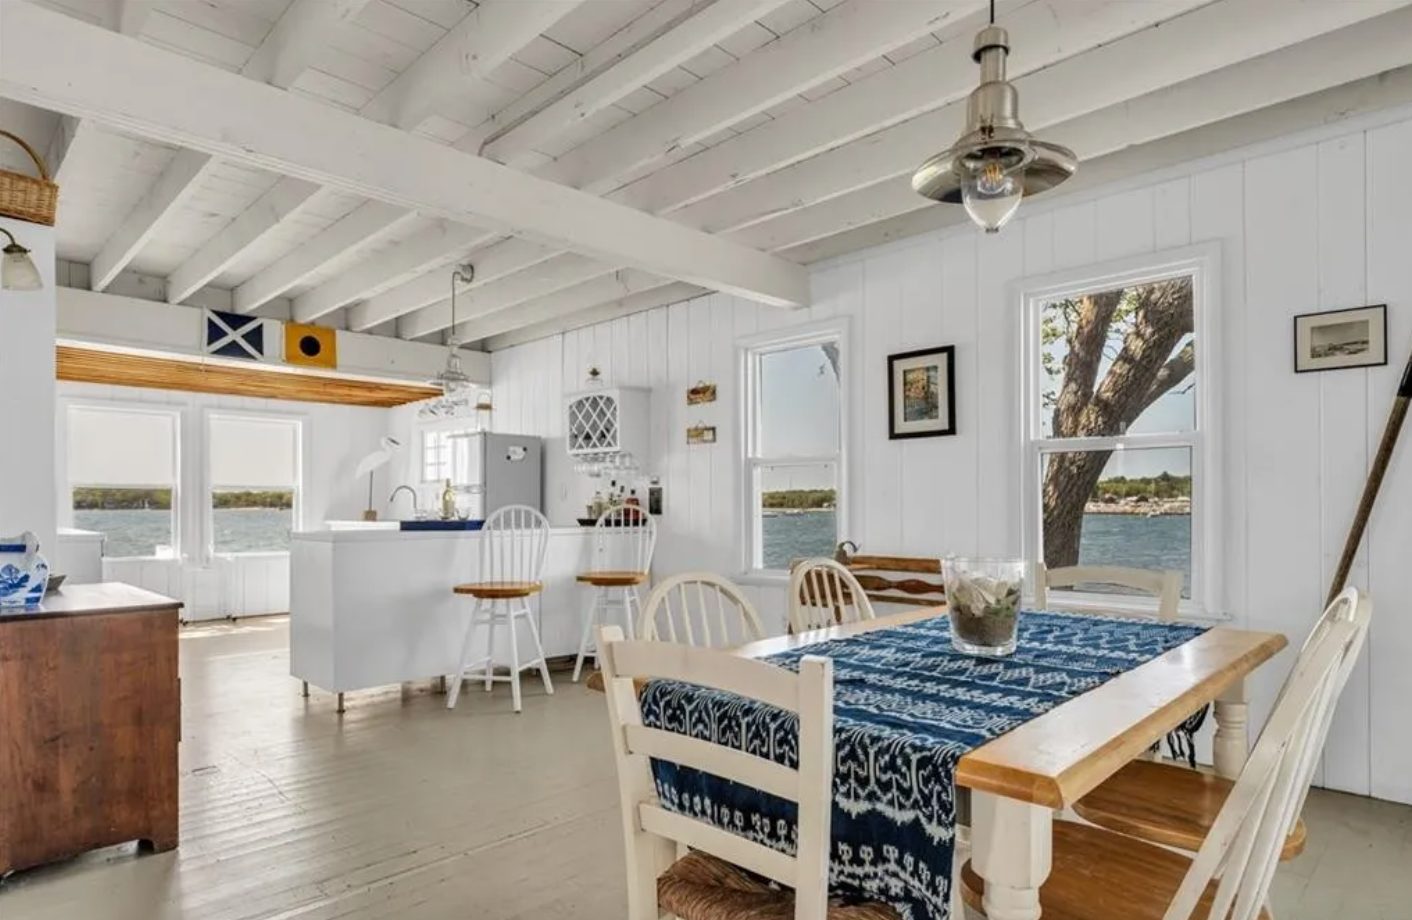 Kitchen and dining area with shiplap walls, white wooden ceiling beams, and single-hung windows.